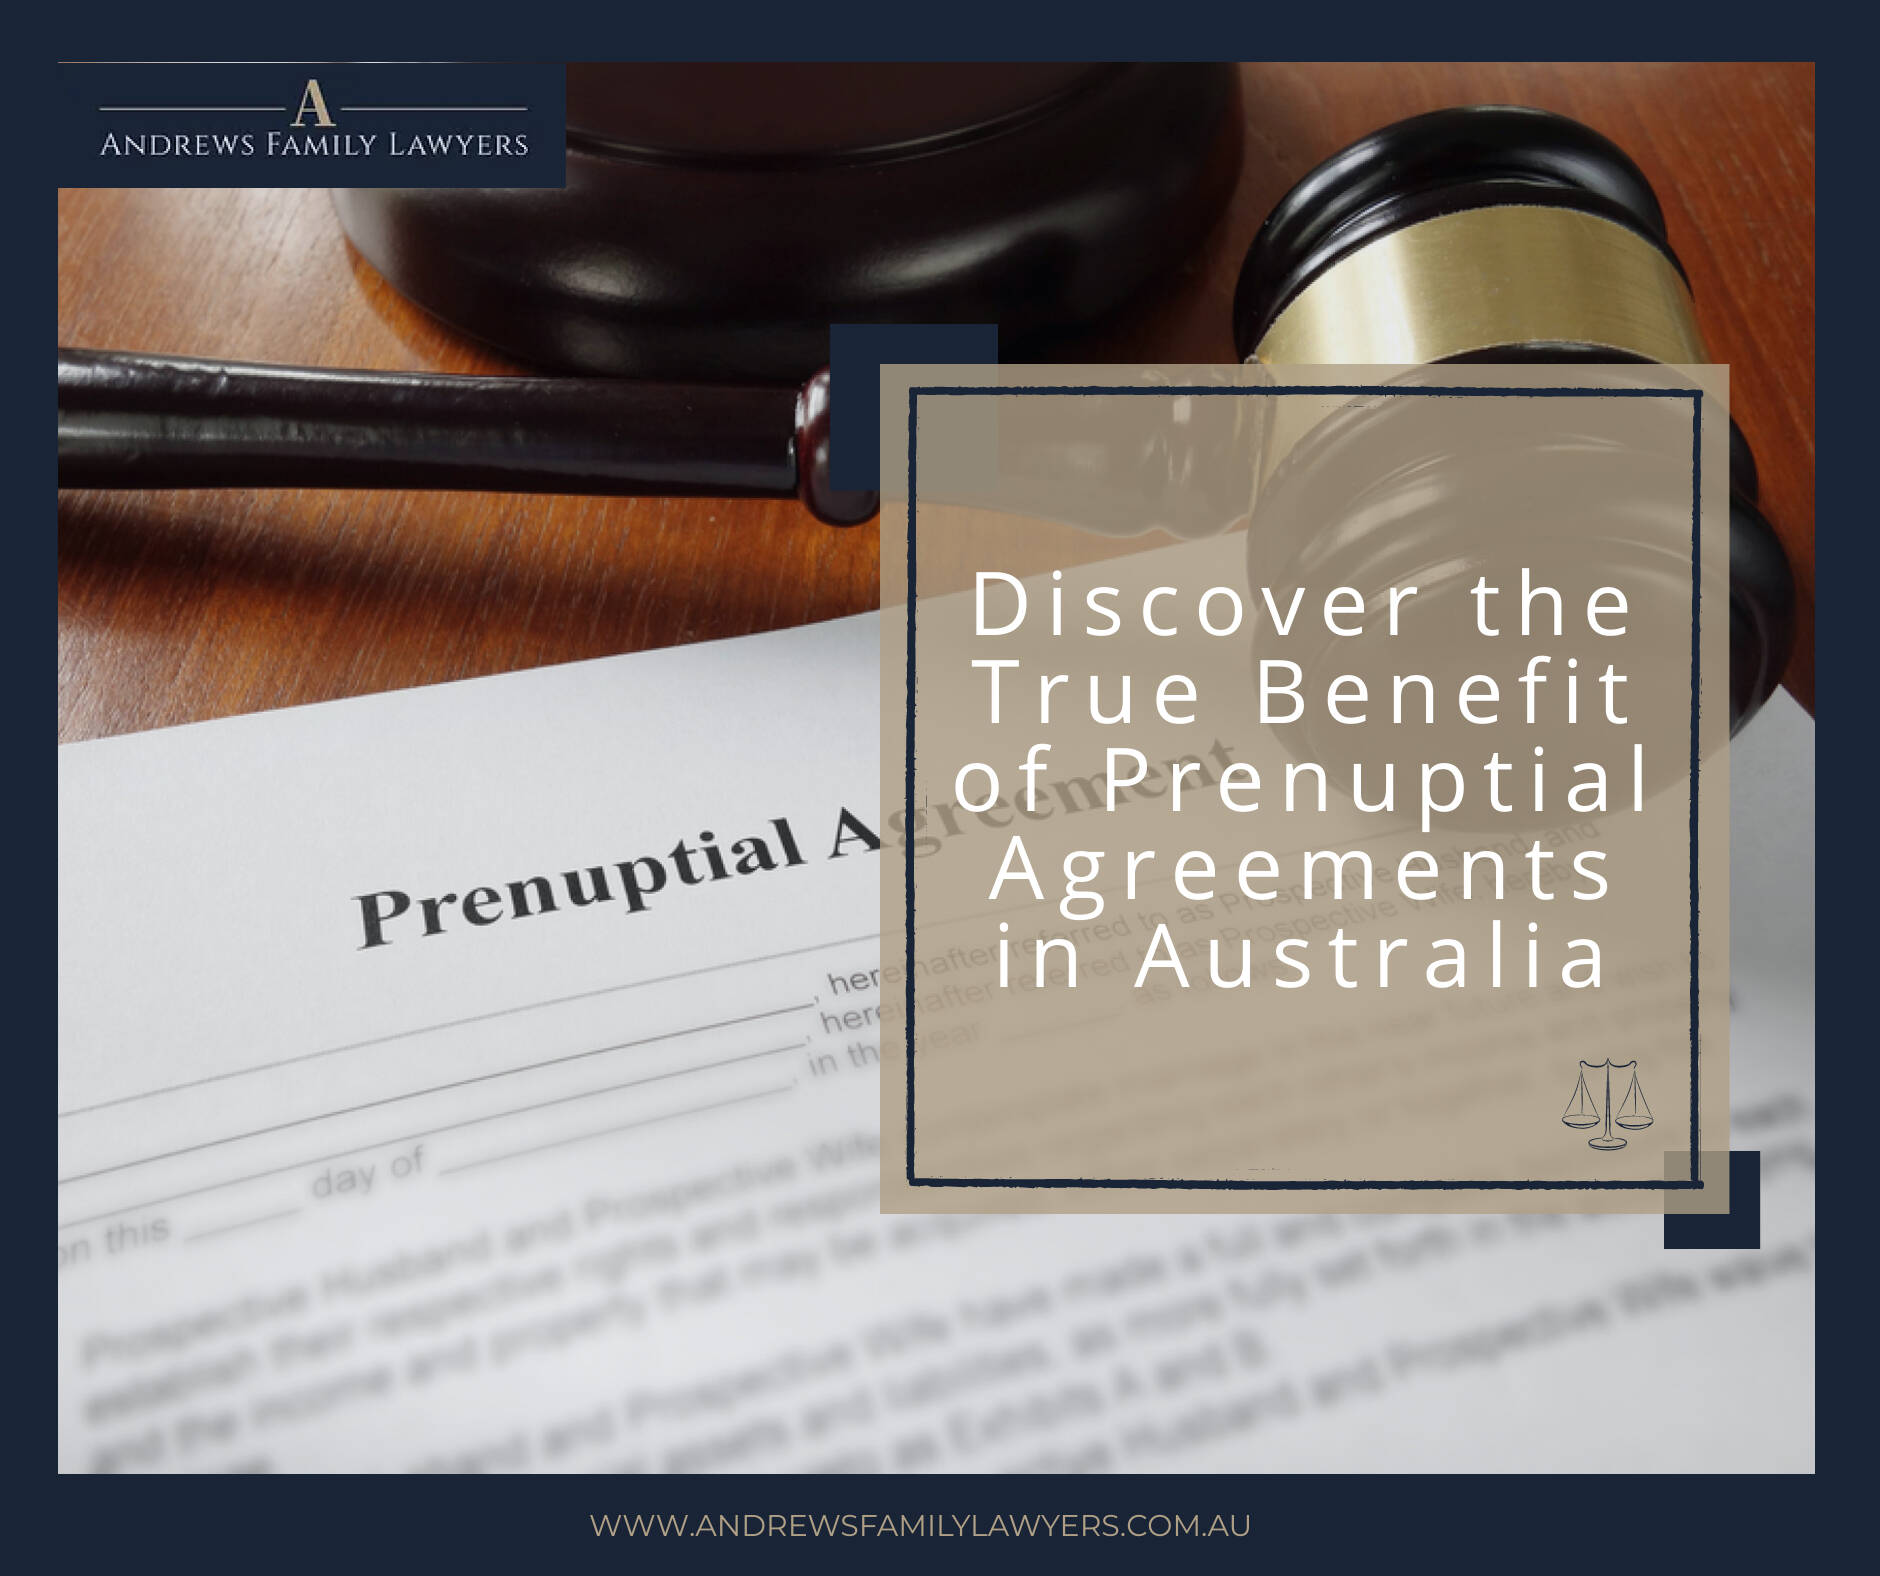 Discover the True Benefit of Prenuptial Agreements in Australia